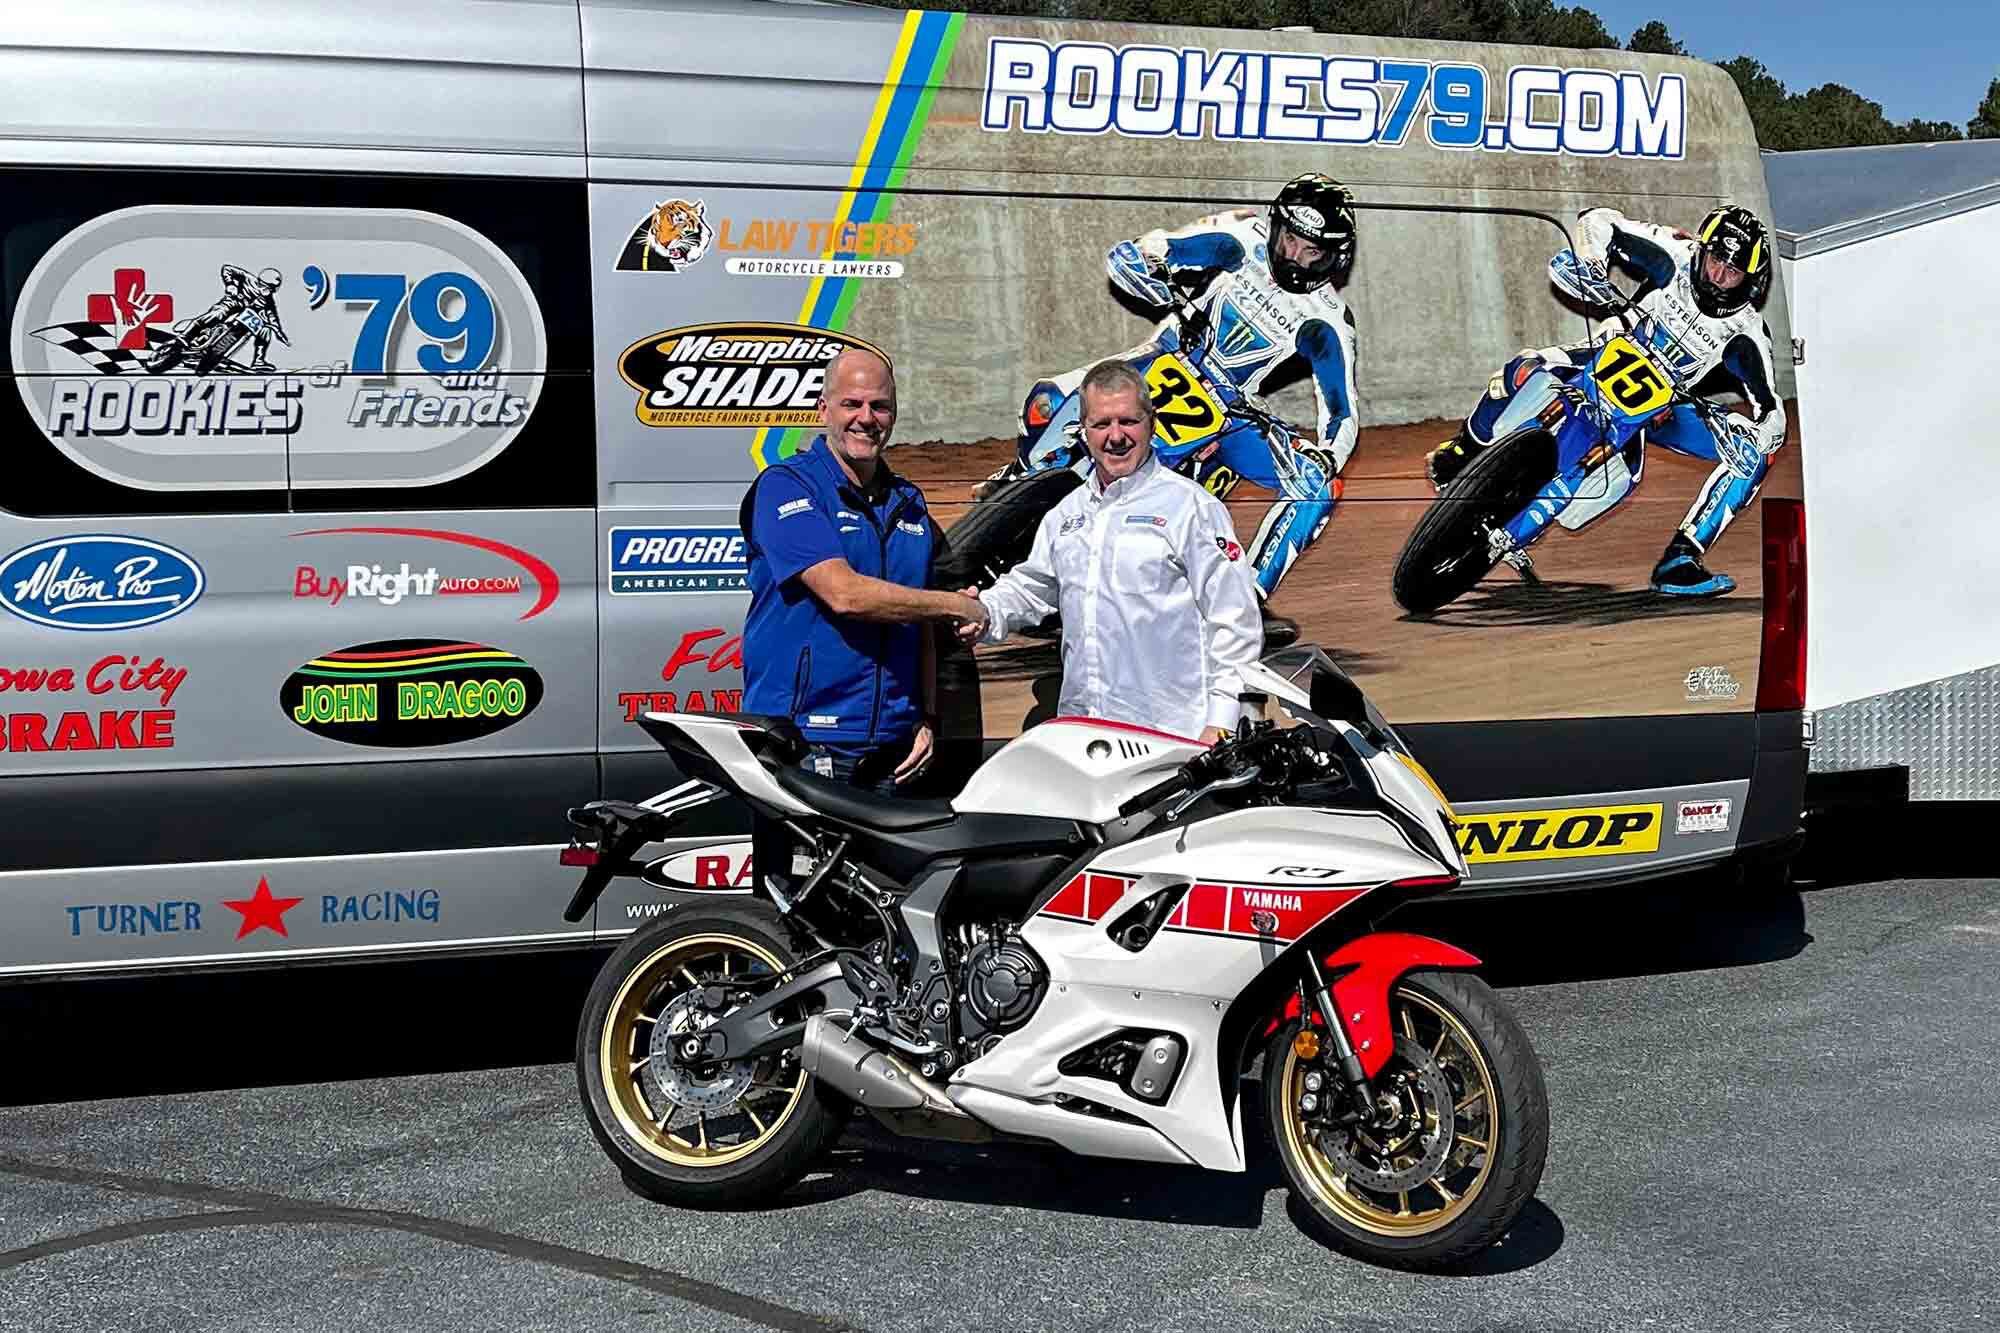 Yamaha Motorcycle Product Line Manager Derek Brooks and Rookies of ’79 Executive Director Charlie Roberts show off the R7 clothed in 60th Anniversary livery.